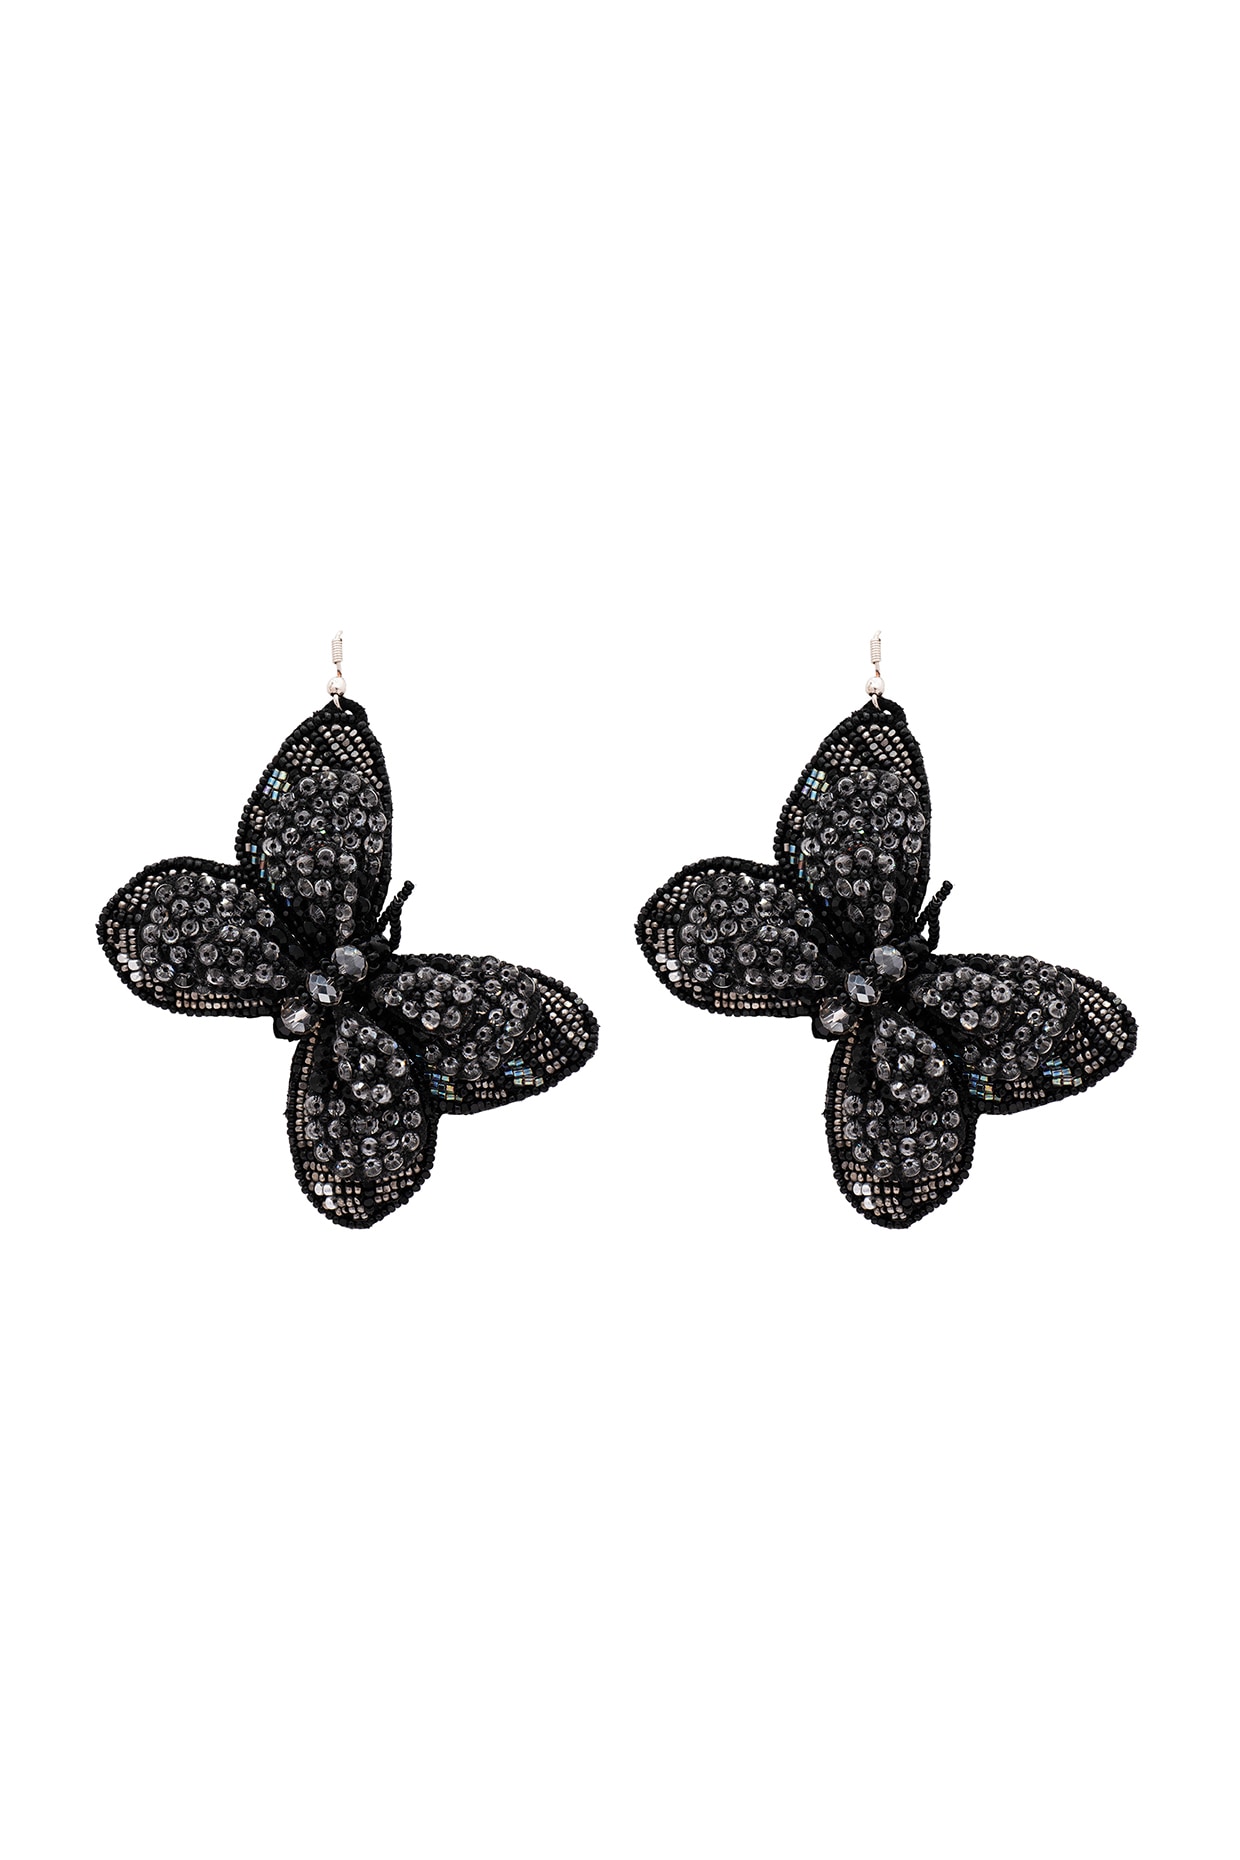 Buy Small Butterfly Earring Stud Black Colour For Girls at Amazon.in